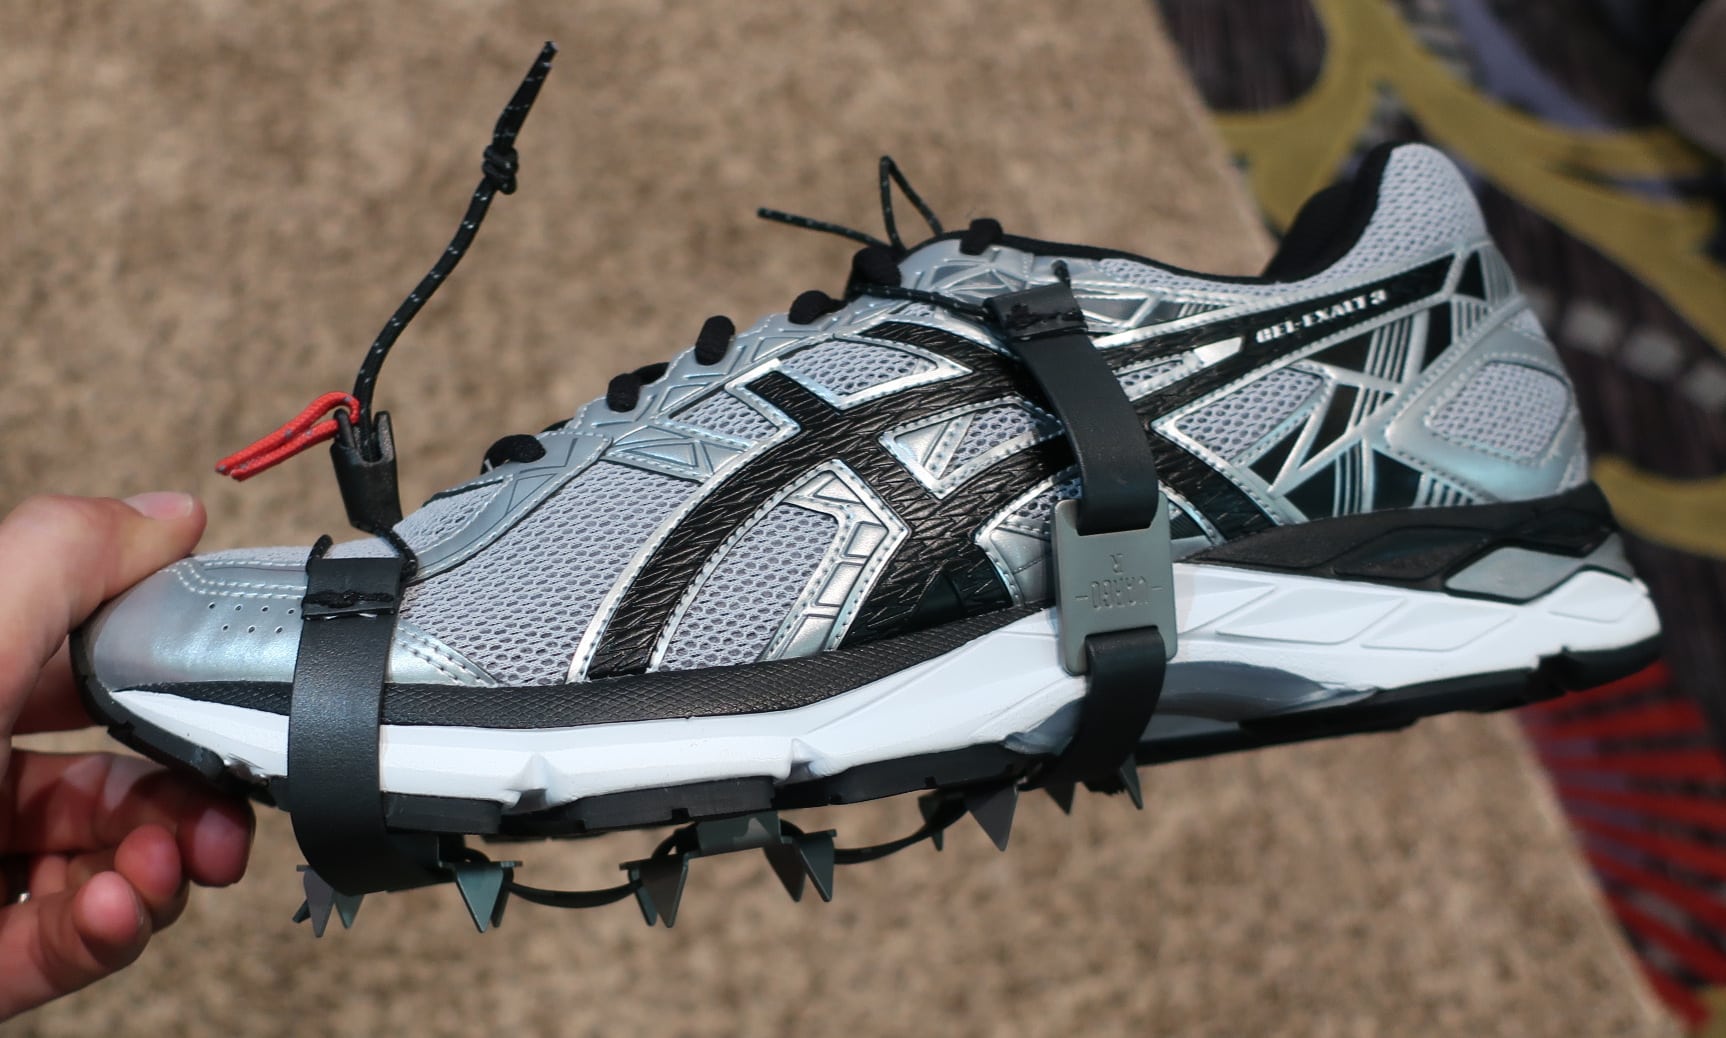 Preview: Vargo Pocket Cleats v3 || Sub-3 oz traction for early 